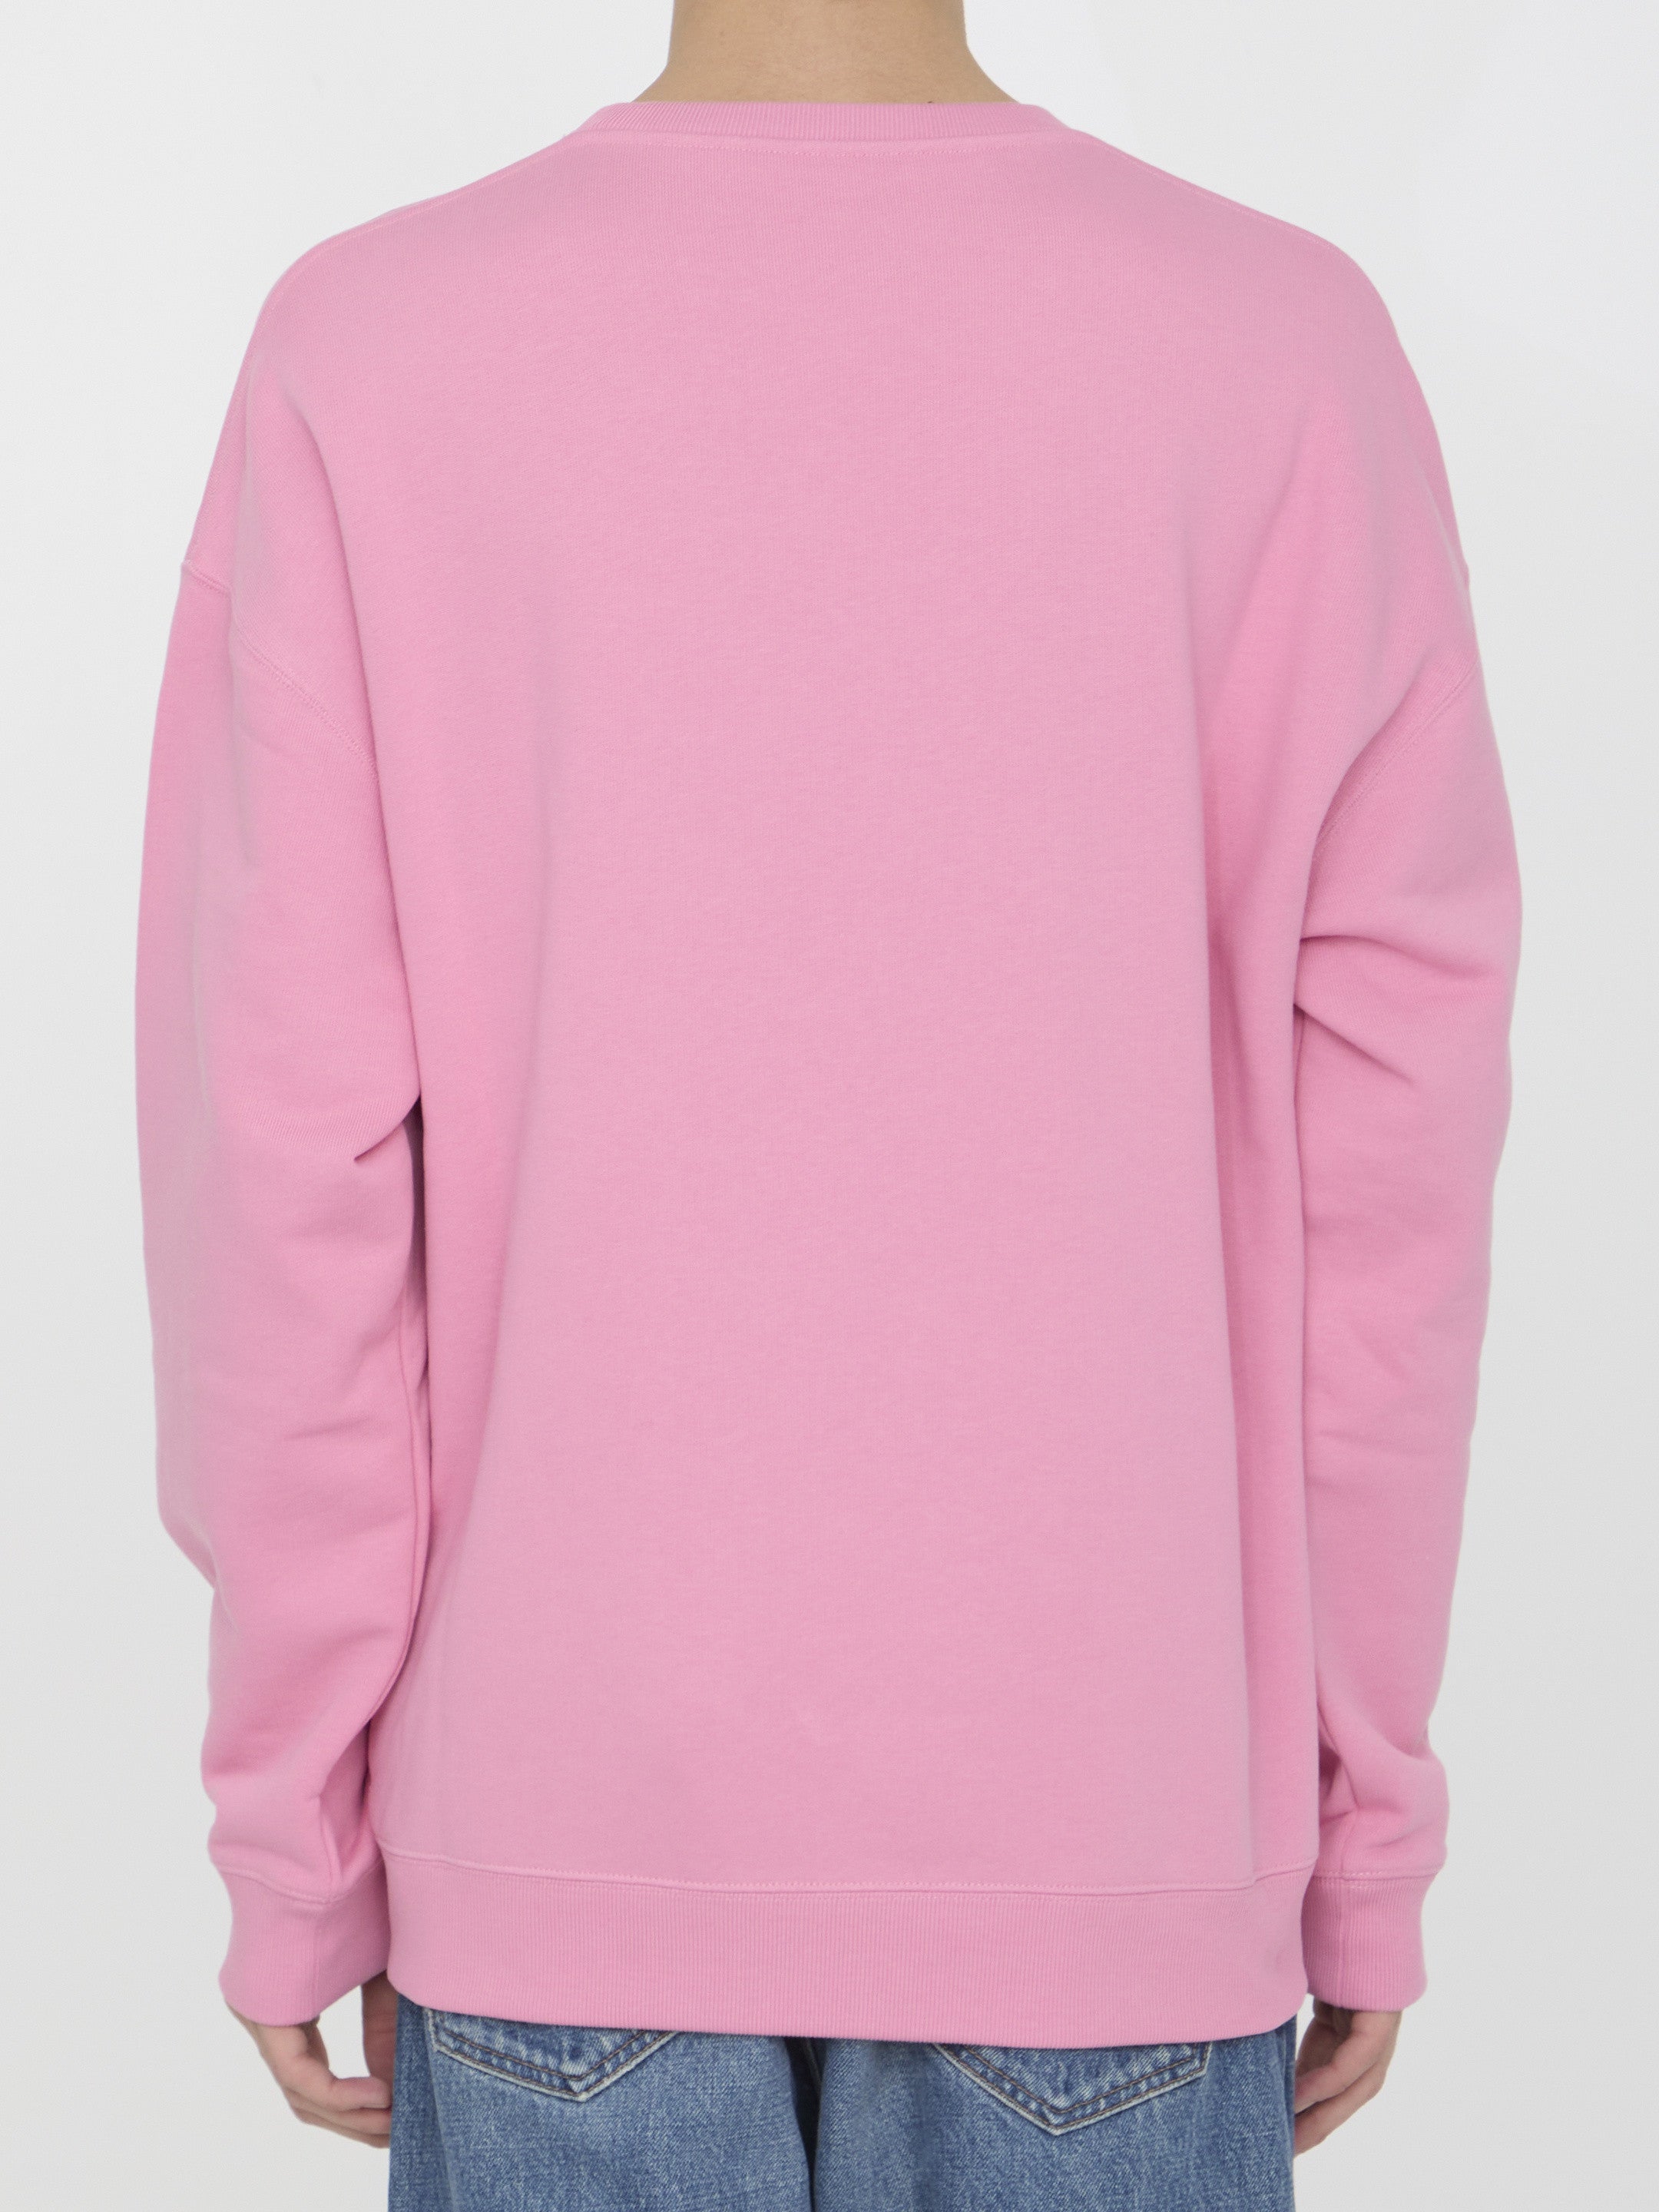 LOEWE-OUTLET-SALE-Cotton-sweatshirt-Strick-S-PINK-ARCHIVE-COLLECTION-4.jpg